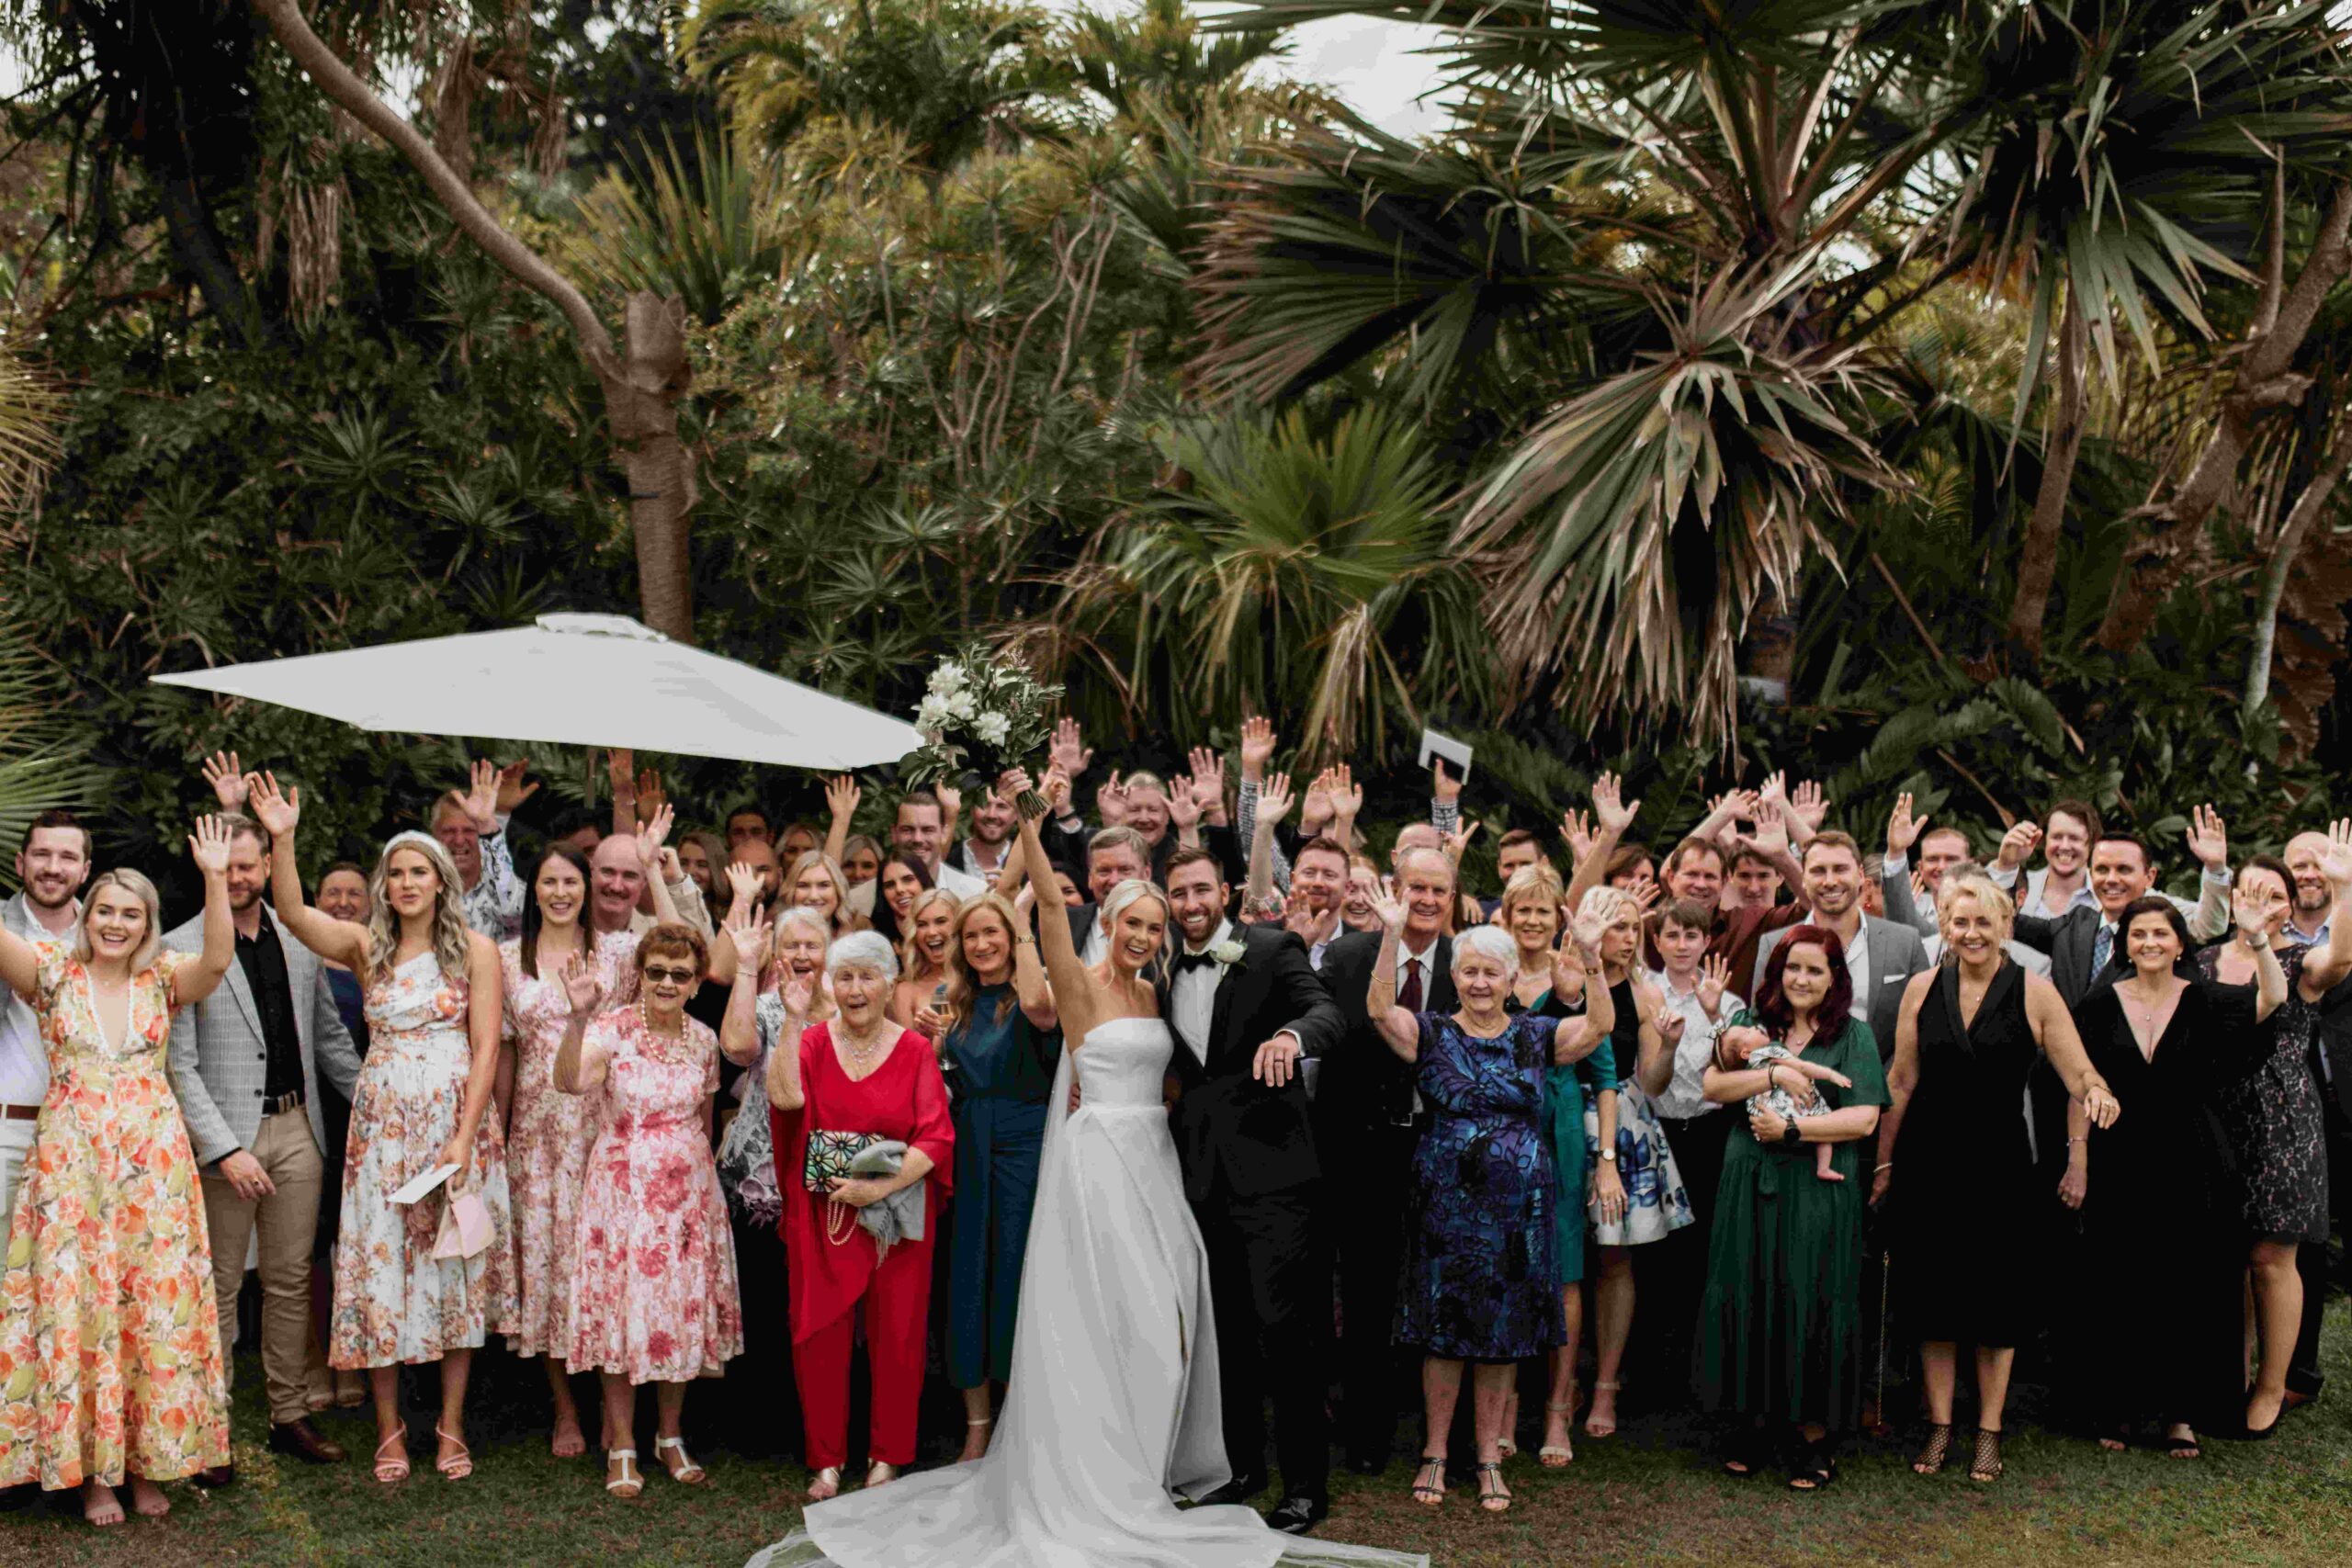 Real-wedding-Teagan-and-Luke-Villa-Botanica-Whitsundays-Australia-by-Rolling-Portraits-post-ceremony-picture-of-the-bride-and-groom-with-all-guests-families-and-friends